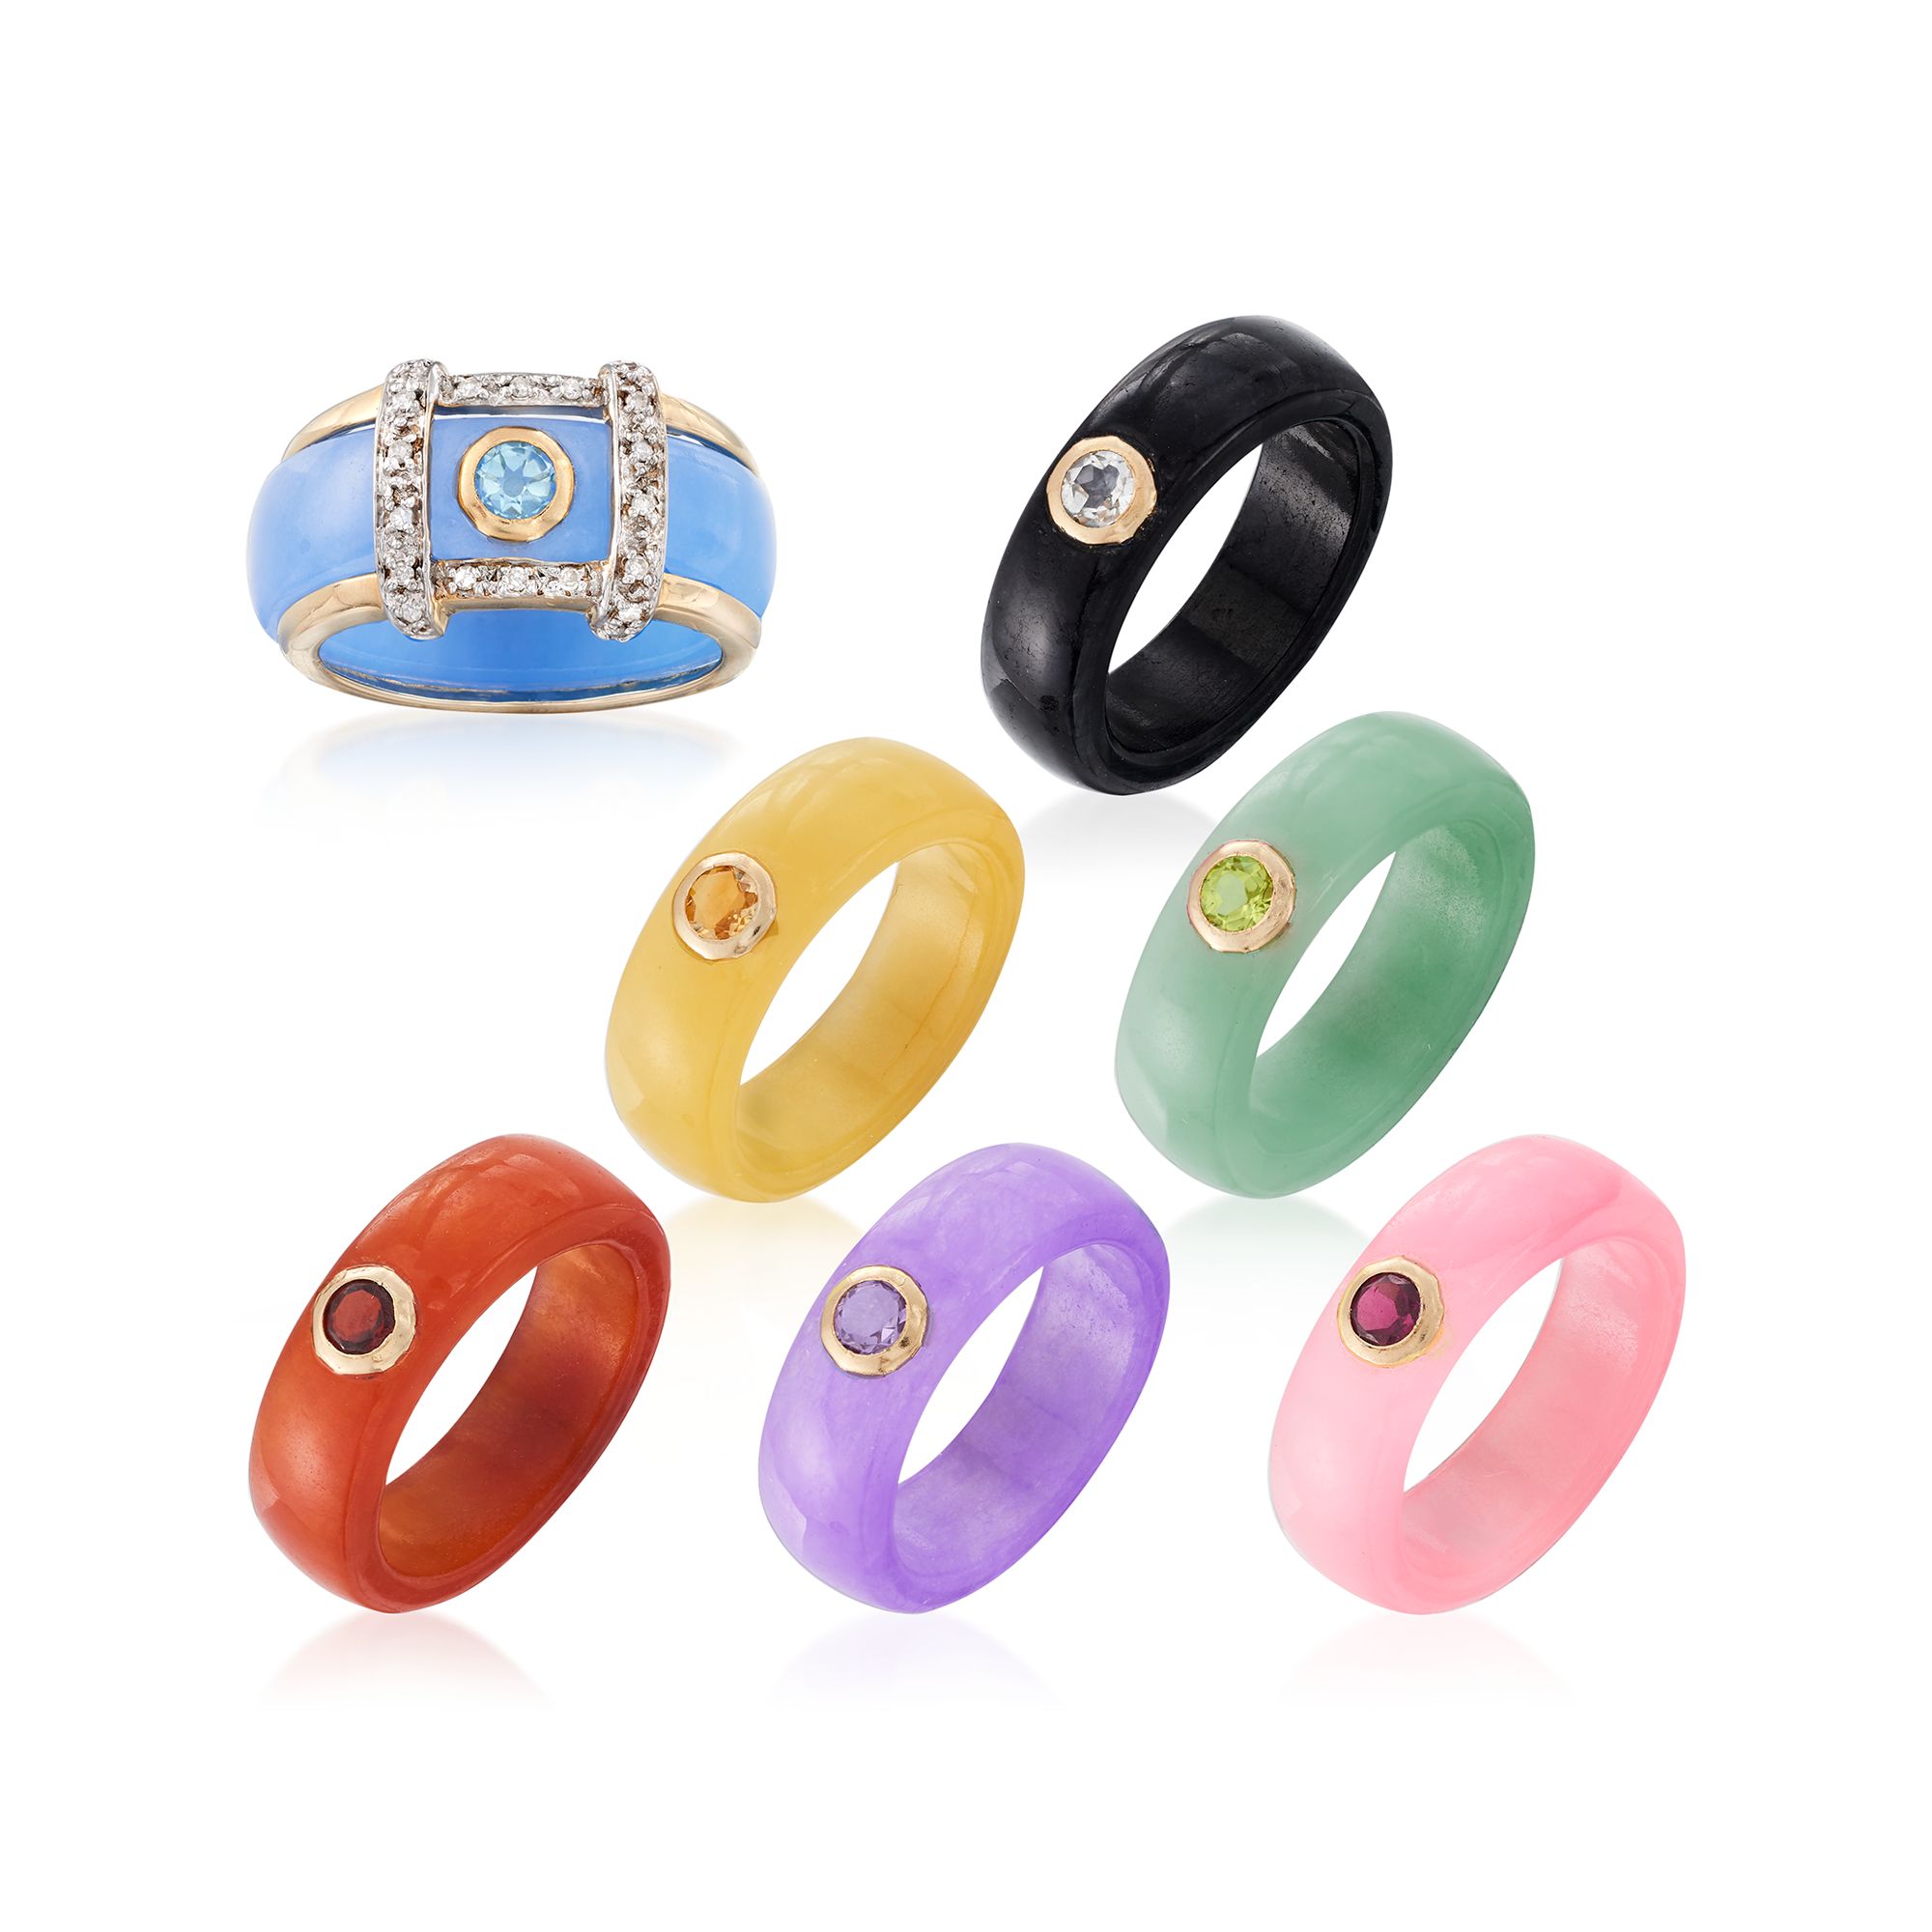 Multicolored Jade Jewelry Set: Seven Interchangeable Bands with 14kt Gold  Ring Jacket | Ross-Simons